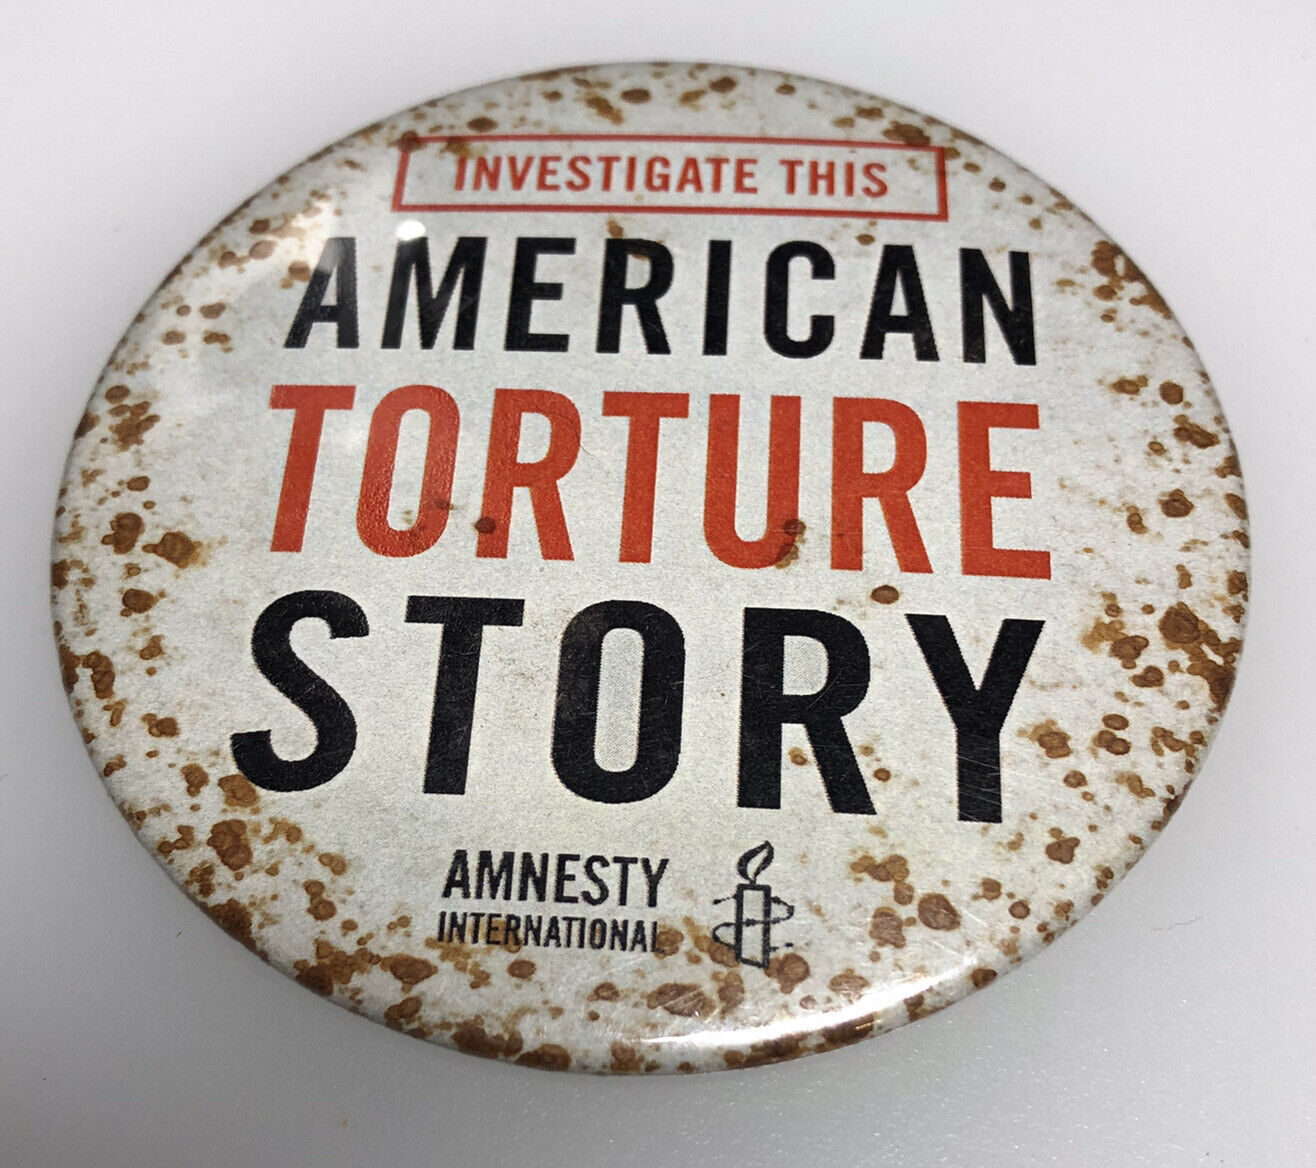 Protest American Detainees Prisons Prisoner Rights Treatment Button Pin Pinback